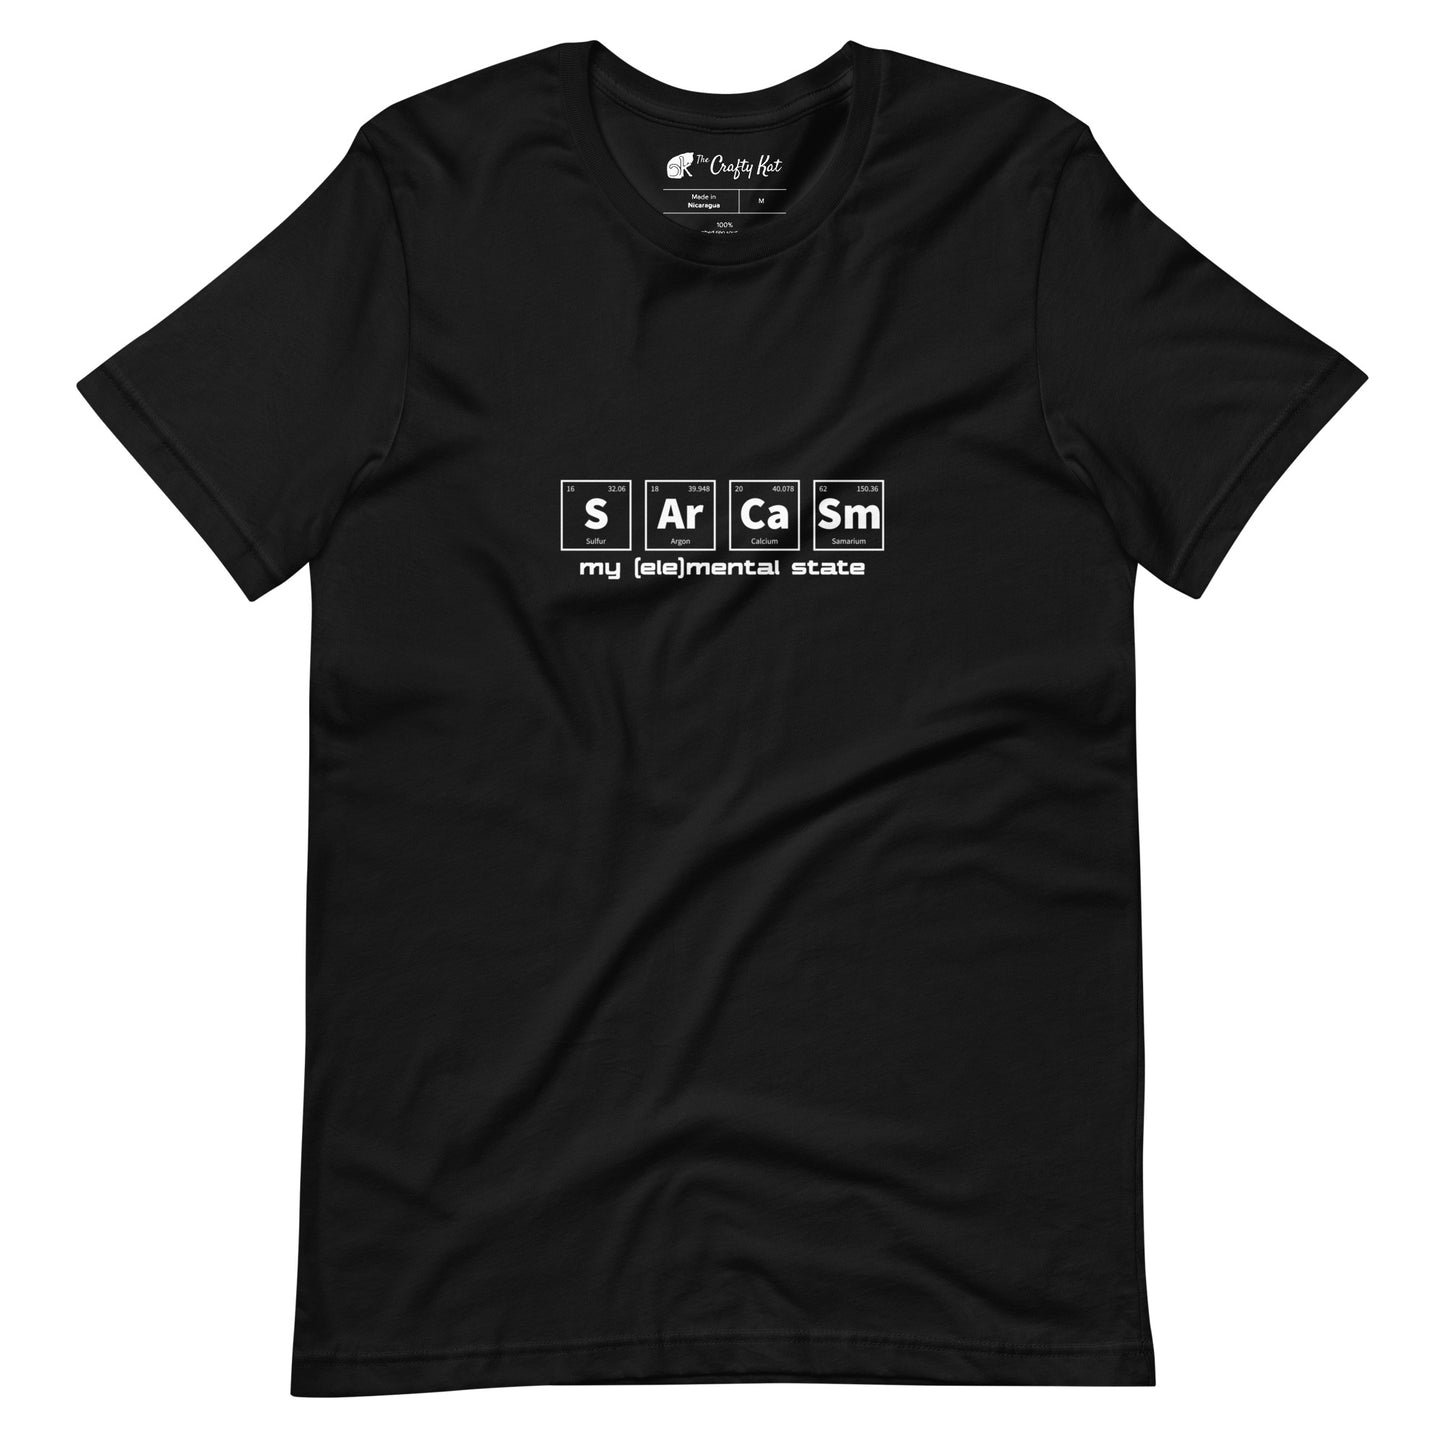 Black t-shirt with graphic of periodic table of elements symbols for Sulfur (S), Argon (Ar), Calcium (Ca), and Samarium (Sm) and text "my (ele)mental state"